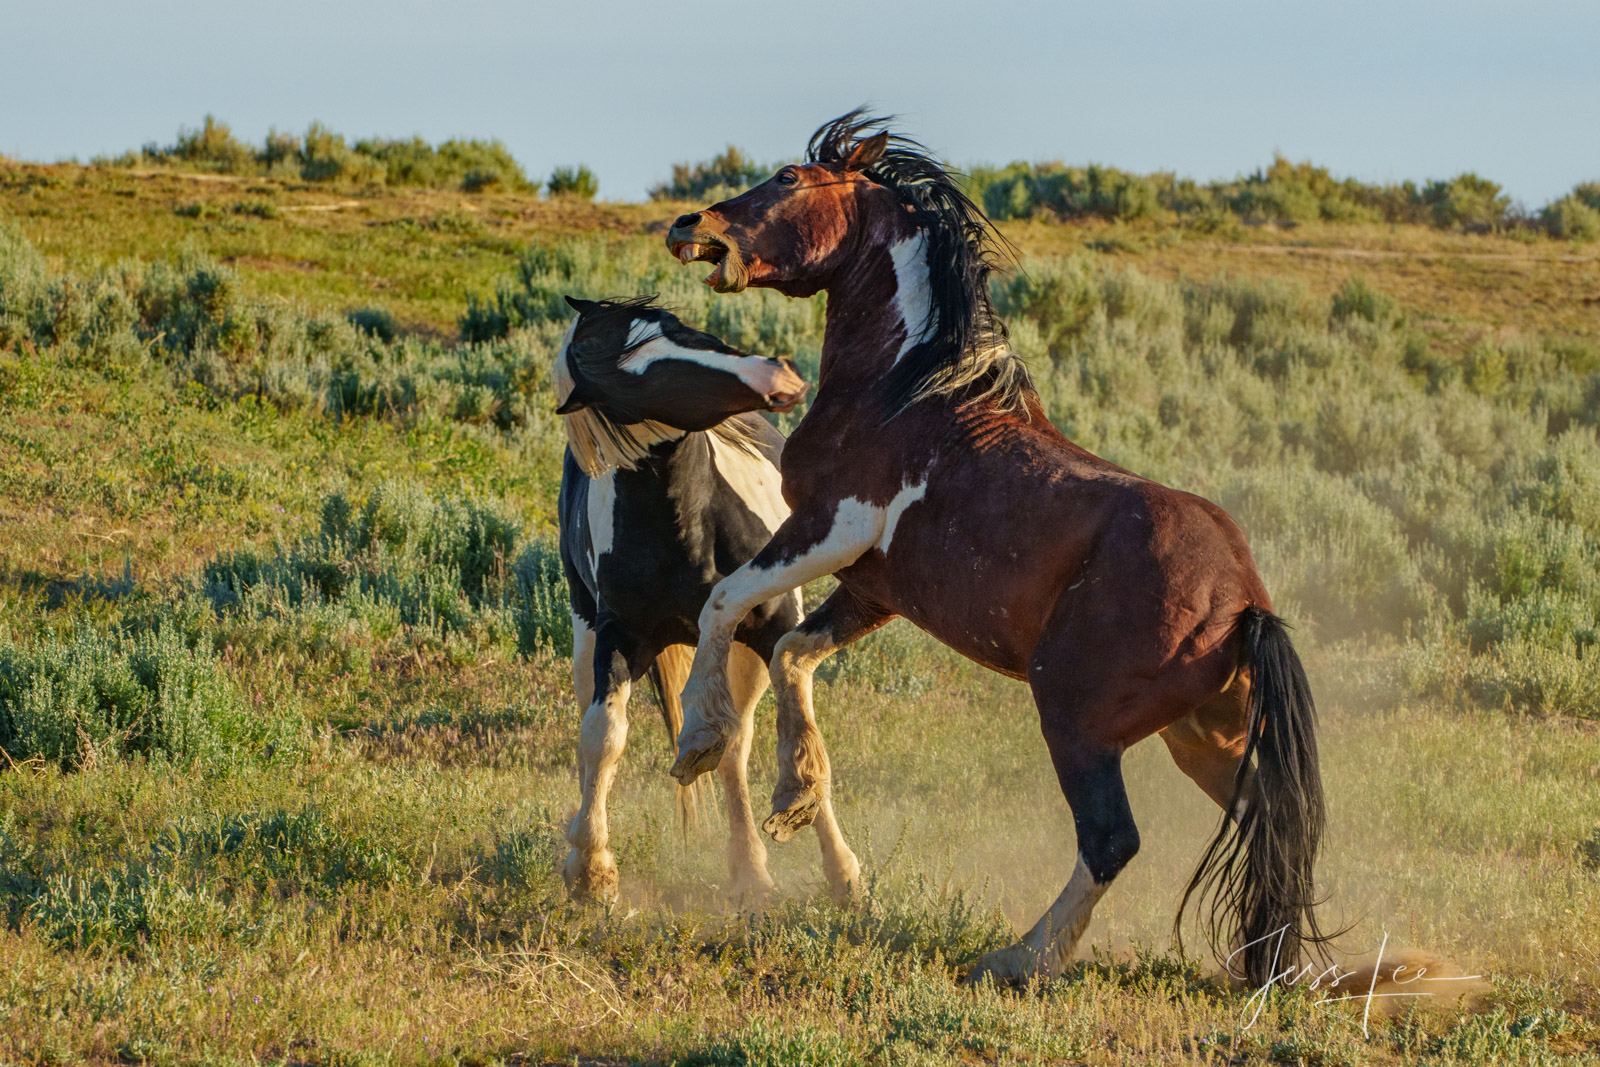 Fine Art Limited Edition Photography of Wild Herd of Mustang Horses in action. Wild Horses or Mustang herd. This is part of the...